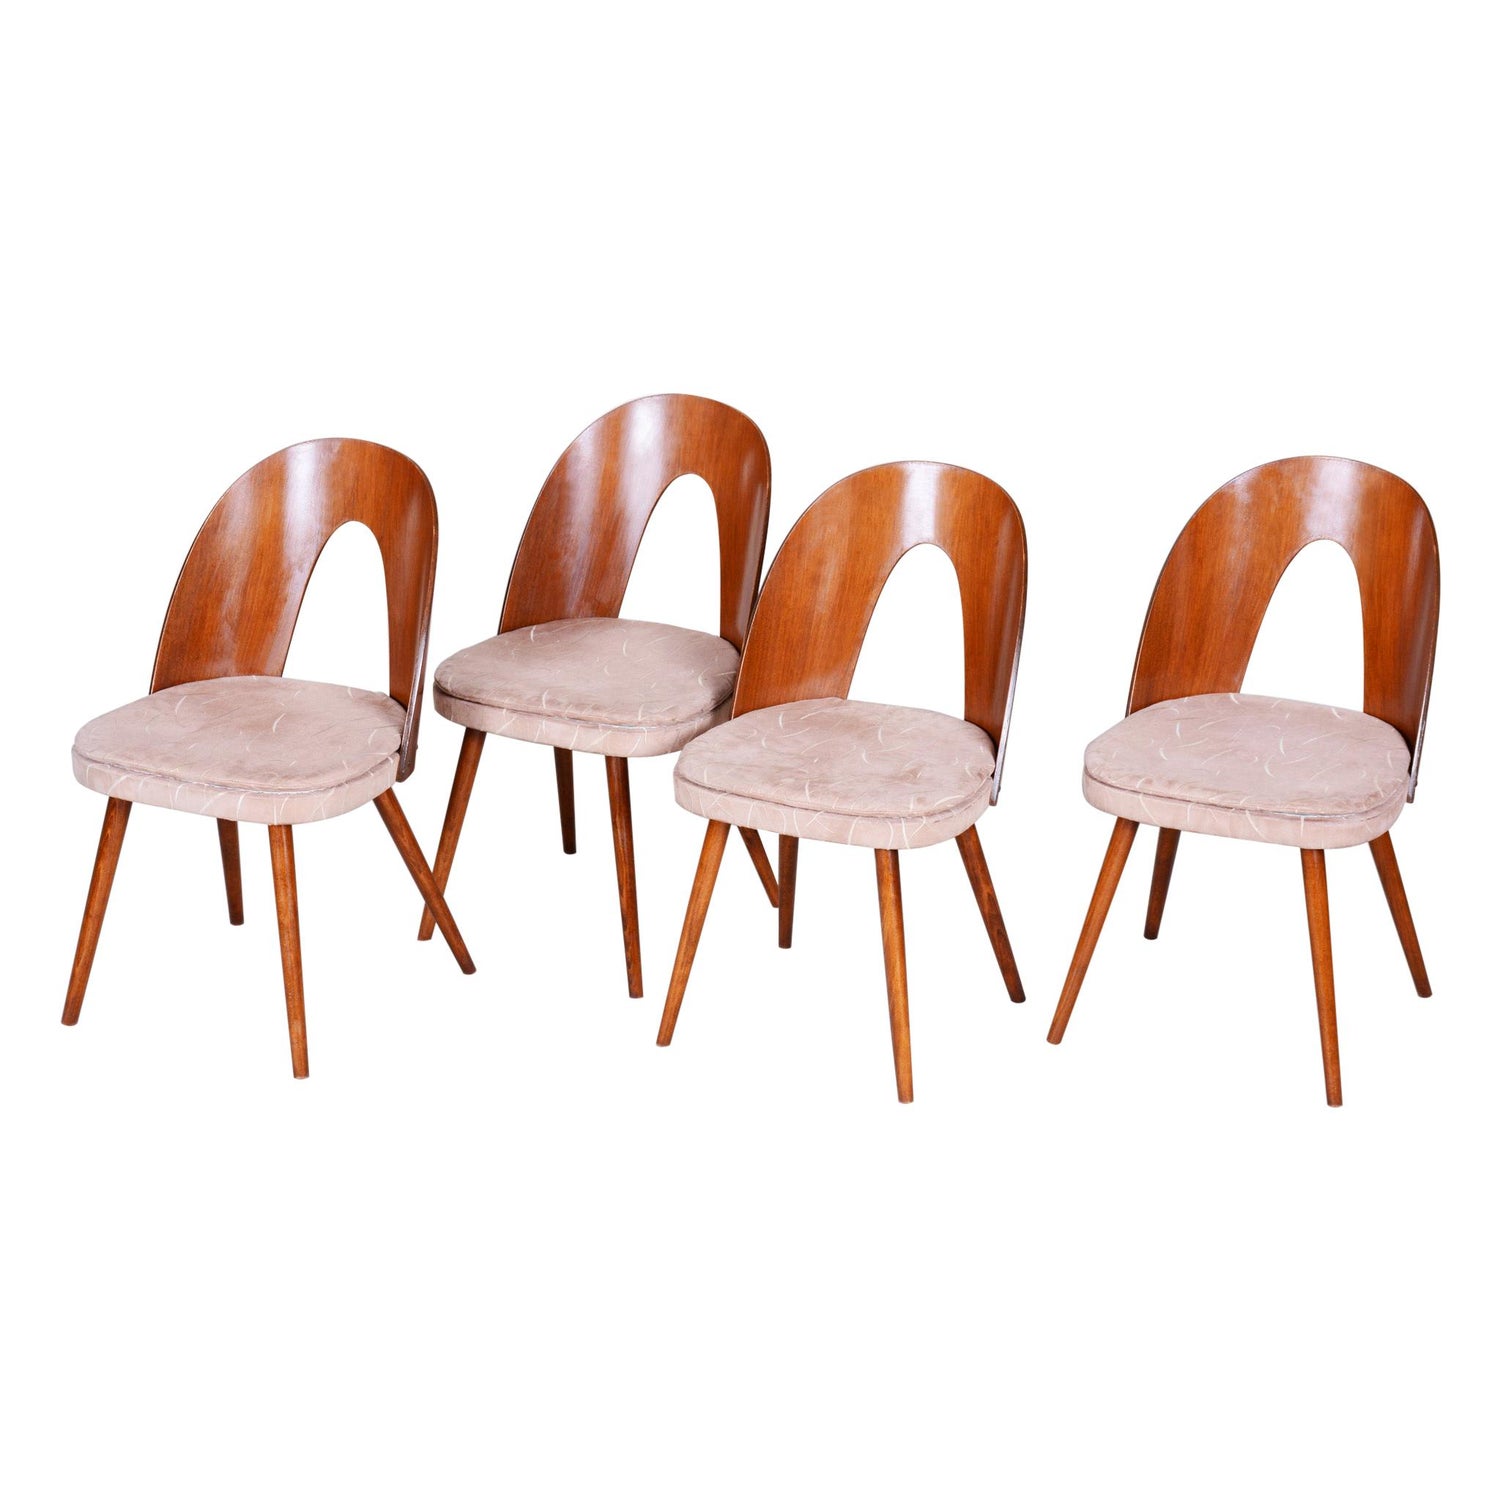 Well Preserved Czech Brown and Beige Chairs by Antonín Šuman, 4 Pcs, 1950s  For Sale at 1stDibs